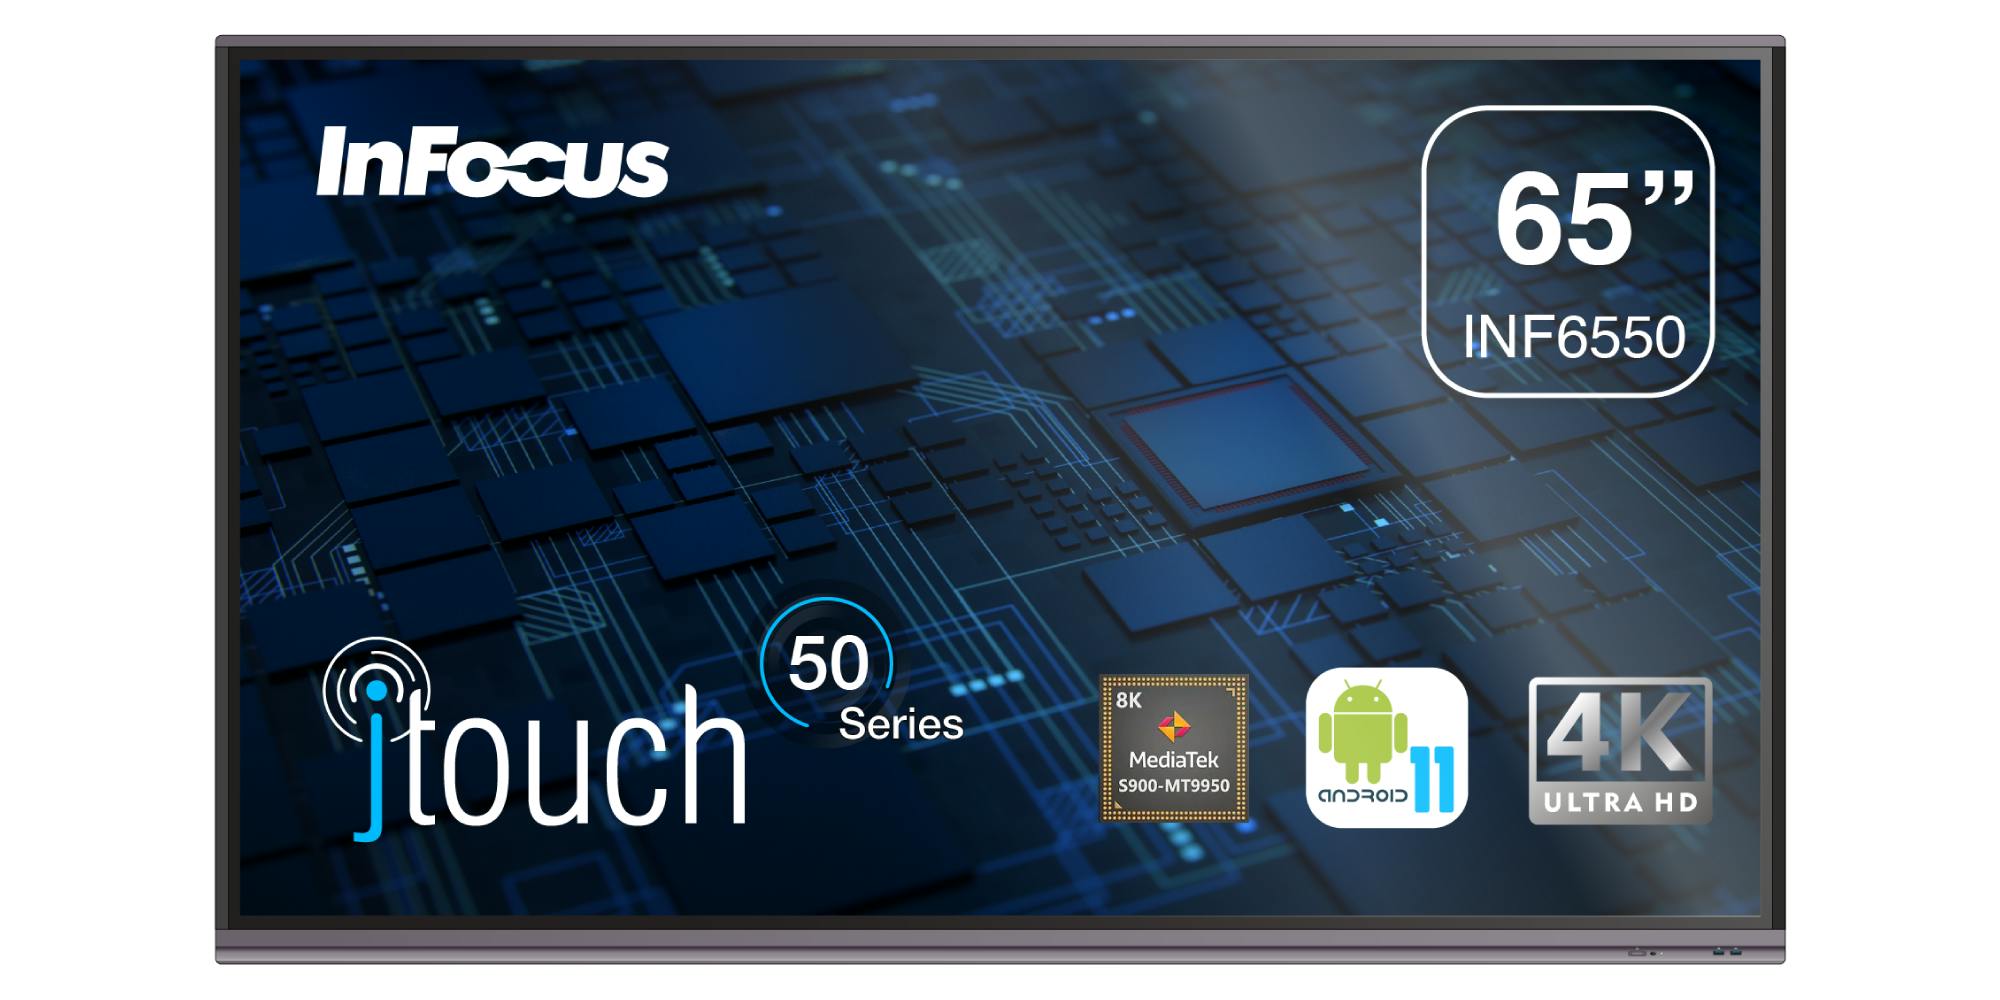 JTouch Series 50 - INF7550